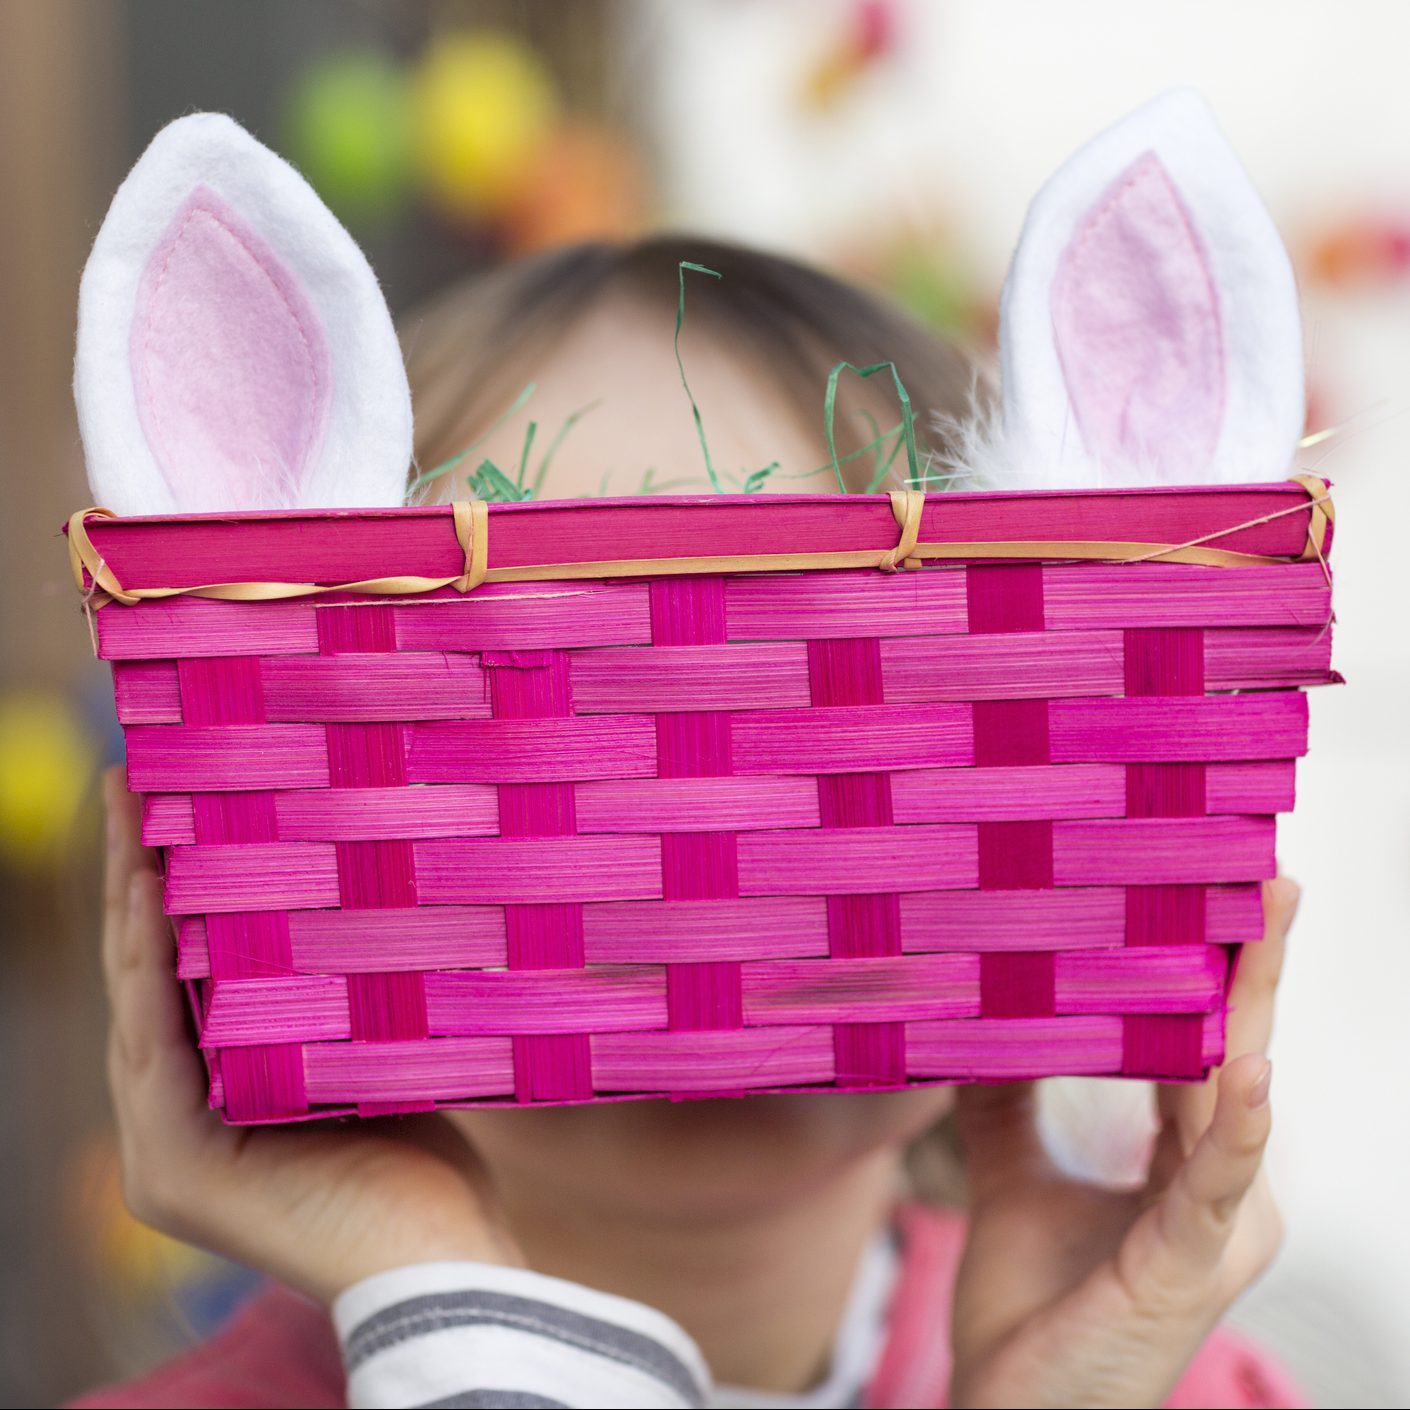 Child hiding face behind pink Easter basket and rabbit ears